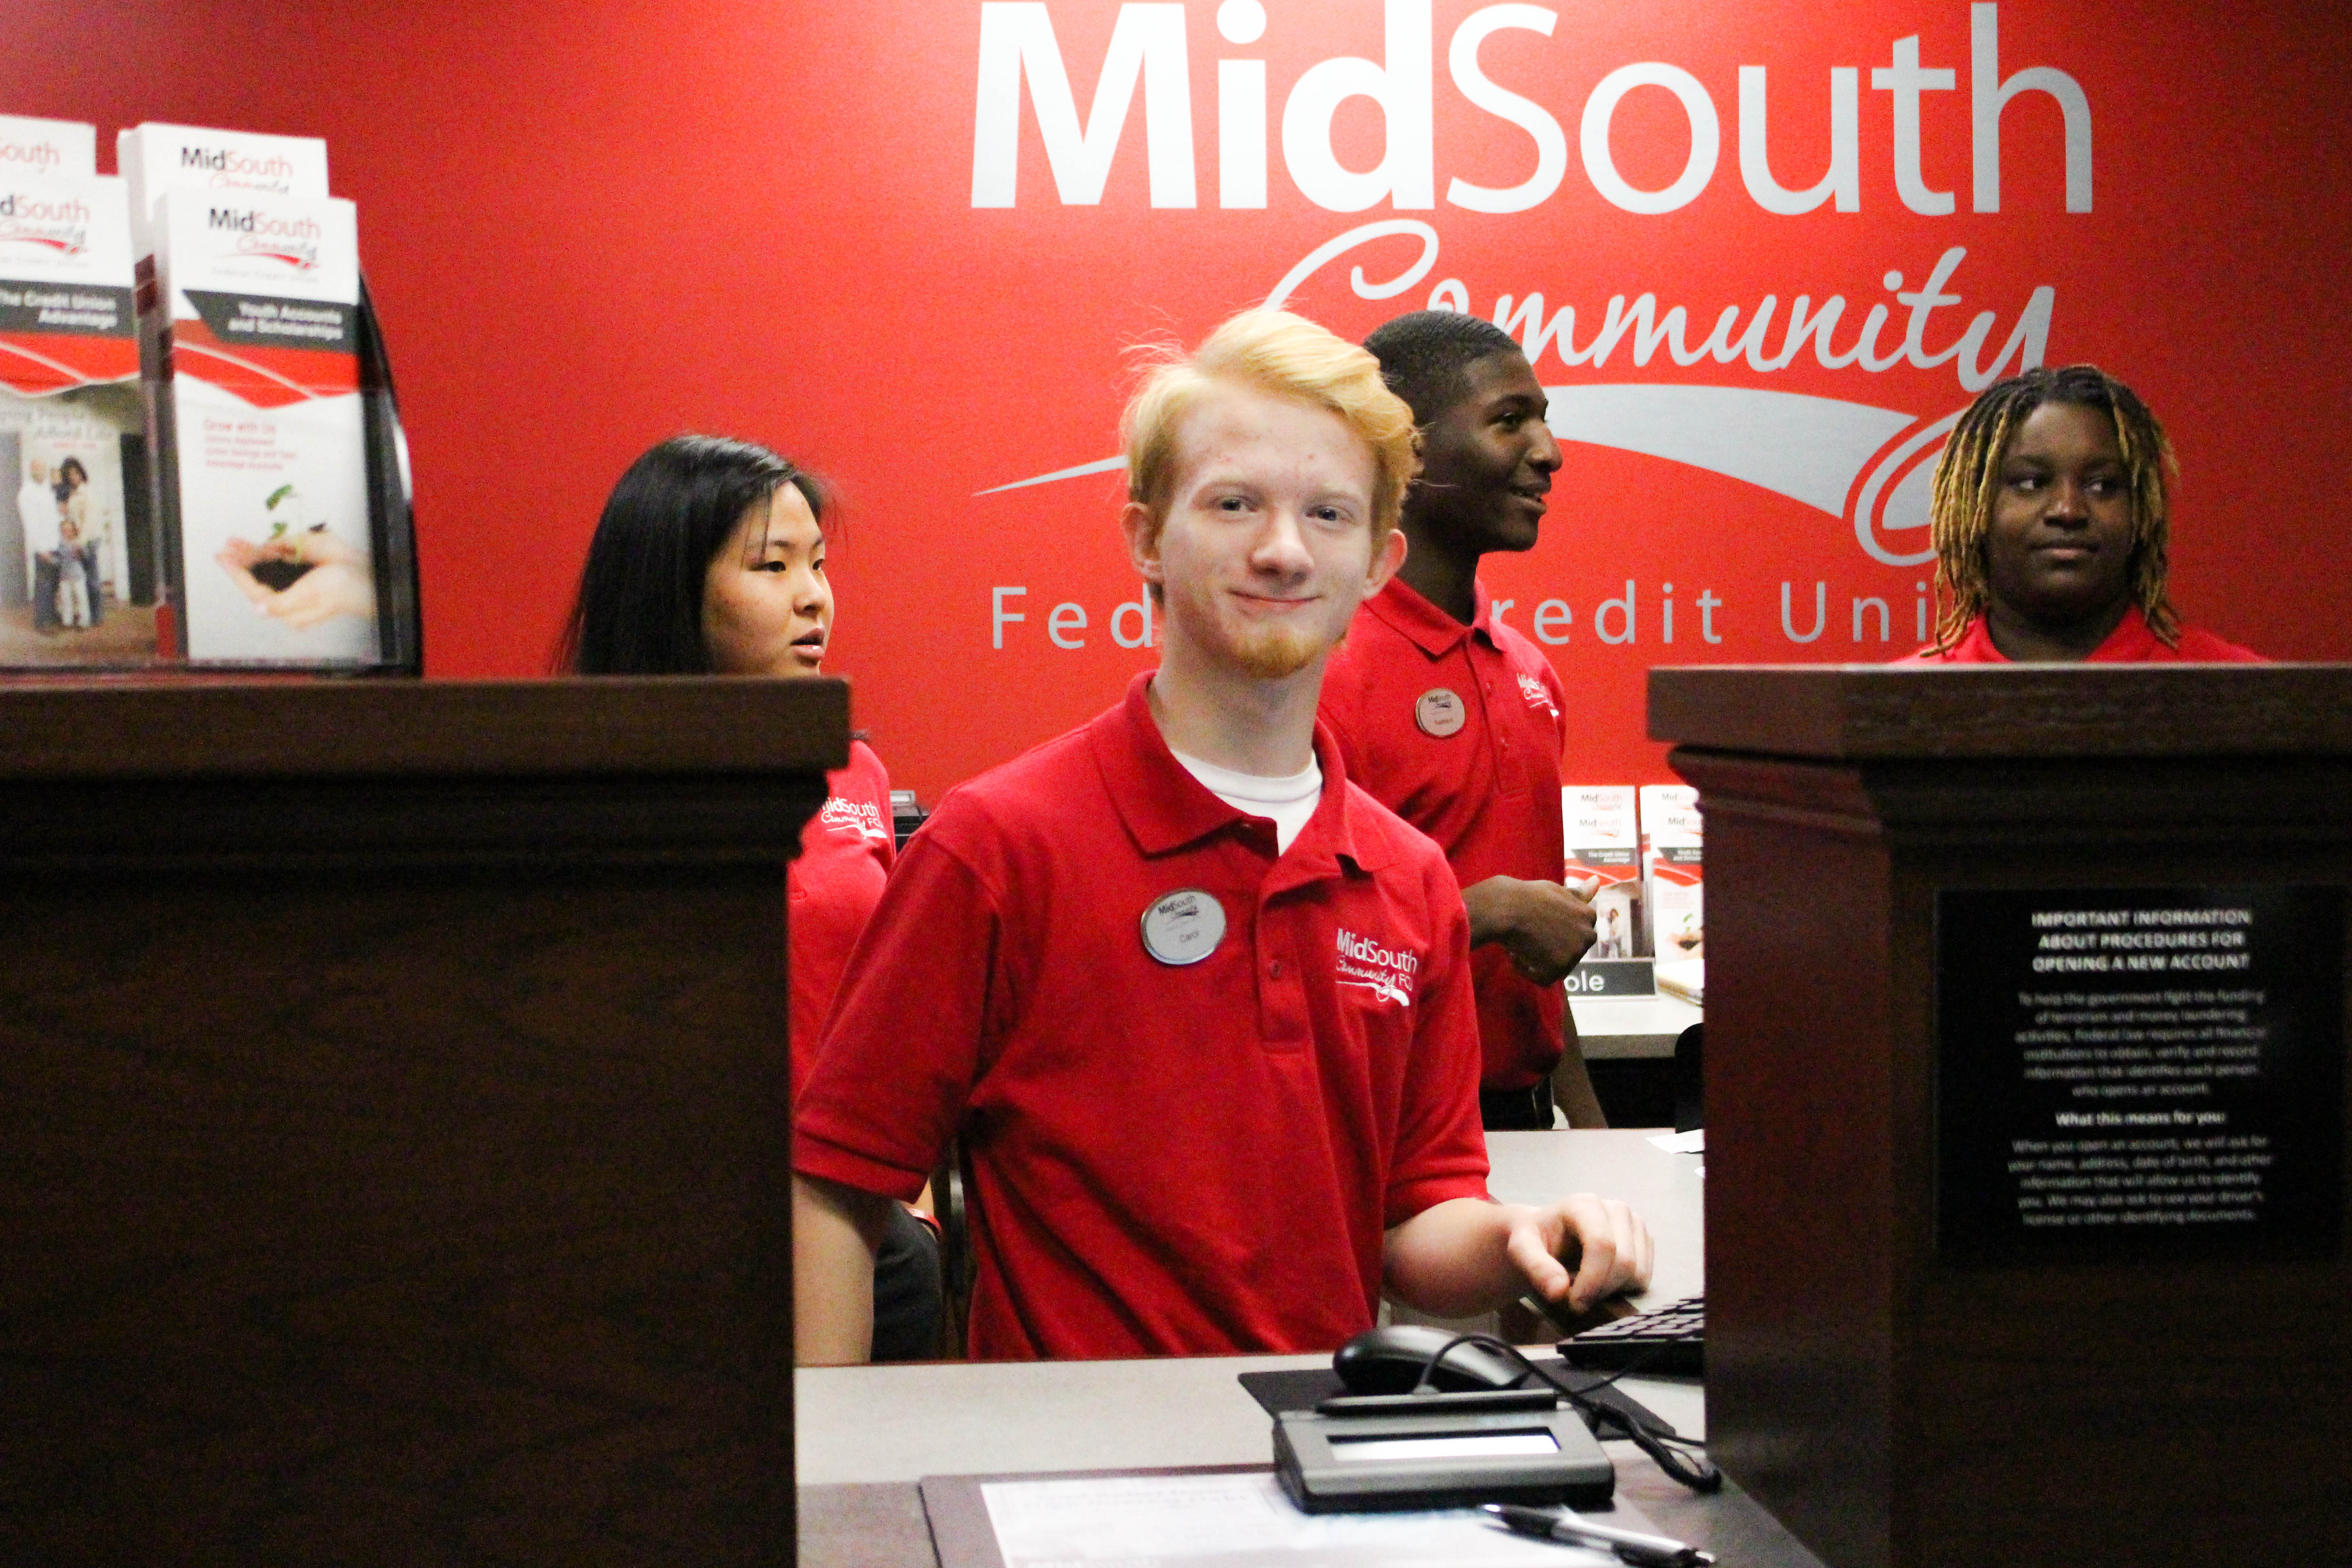 Students at William H. Hutchings College and Career Academy now have a unique opportunity to work and learn at the MidSouth Community FCU student branch.